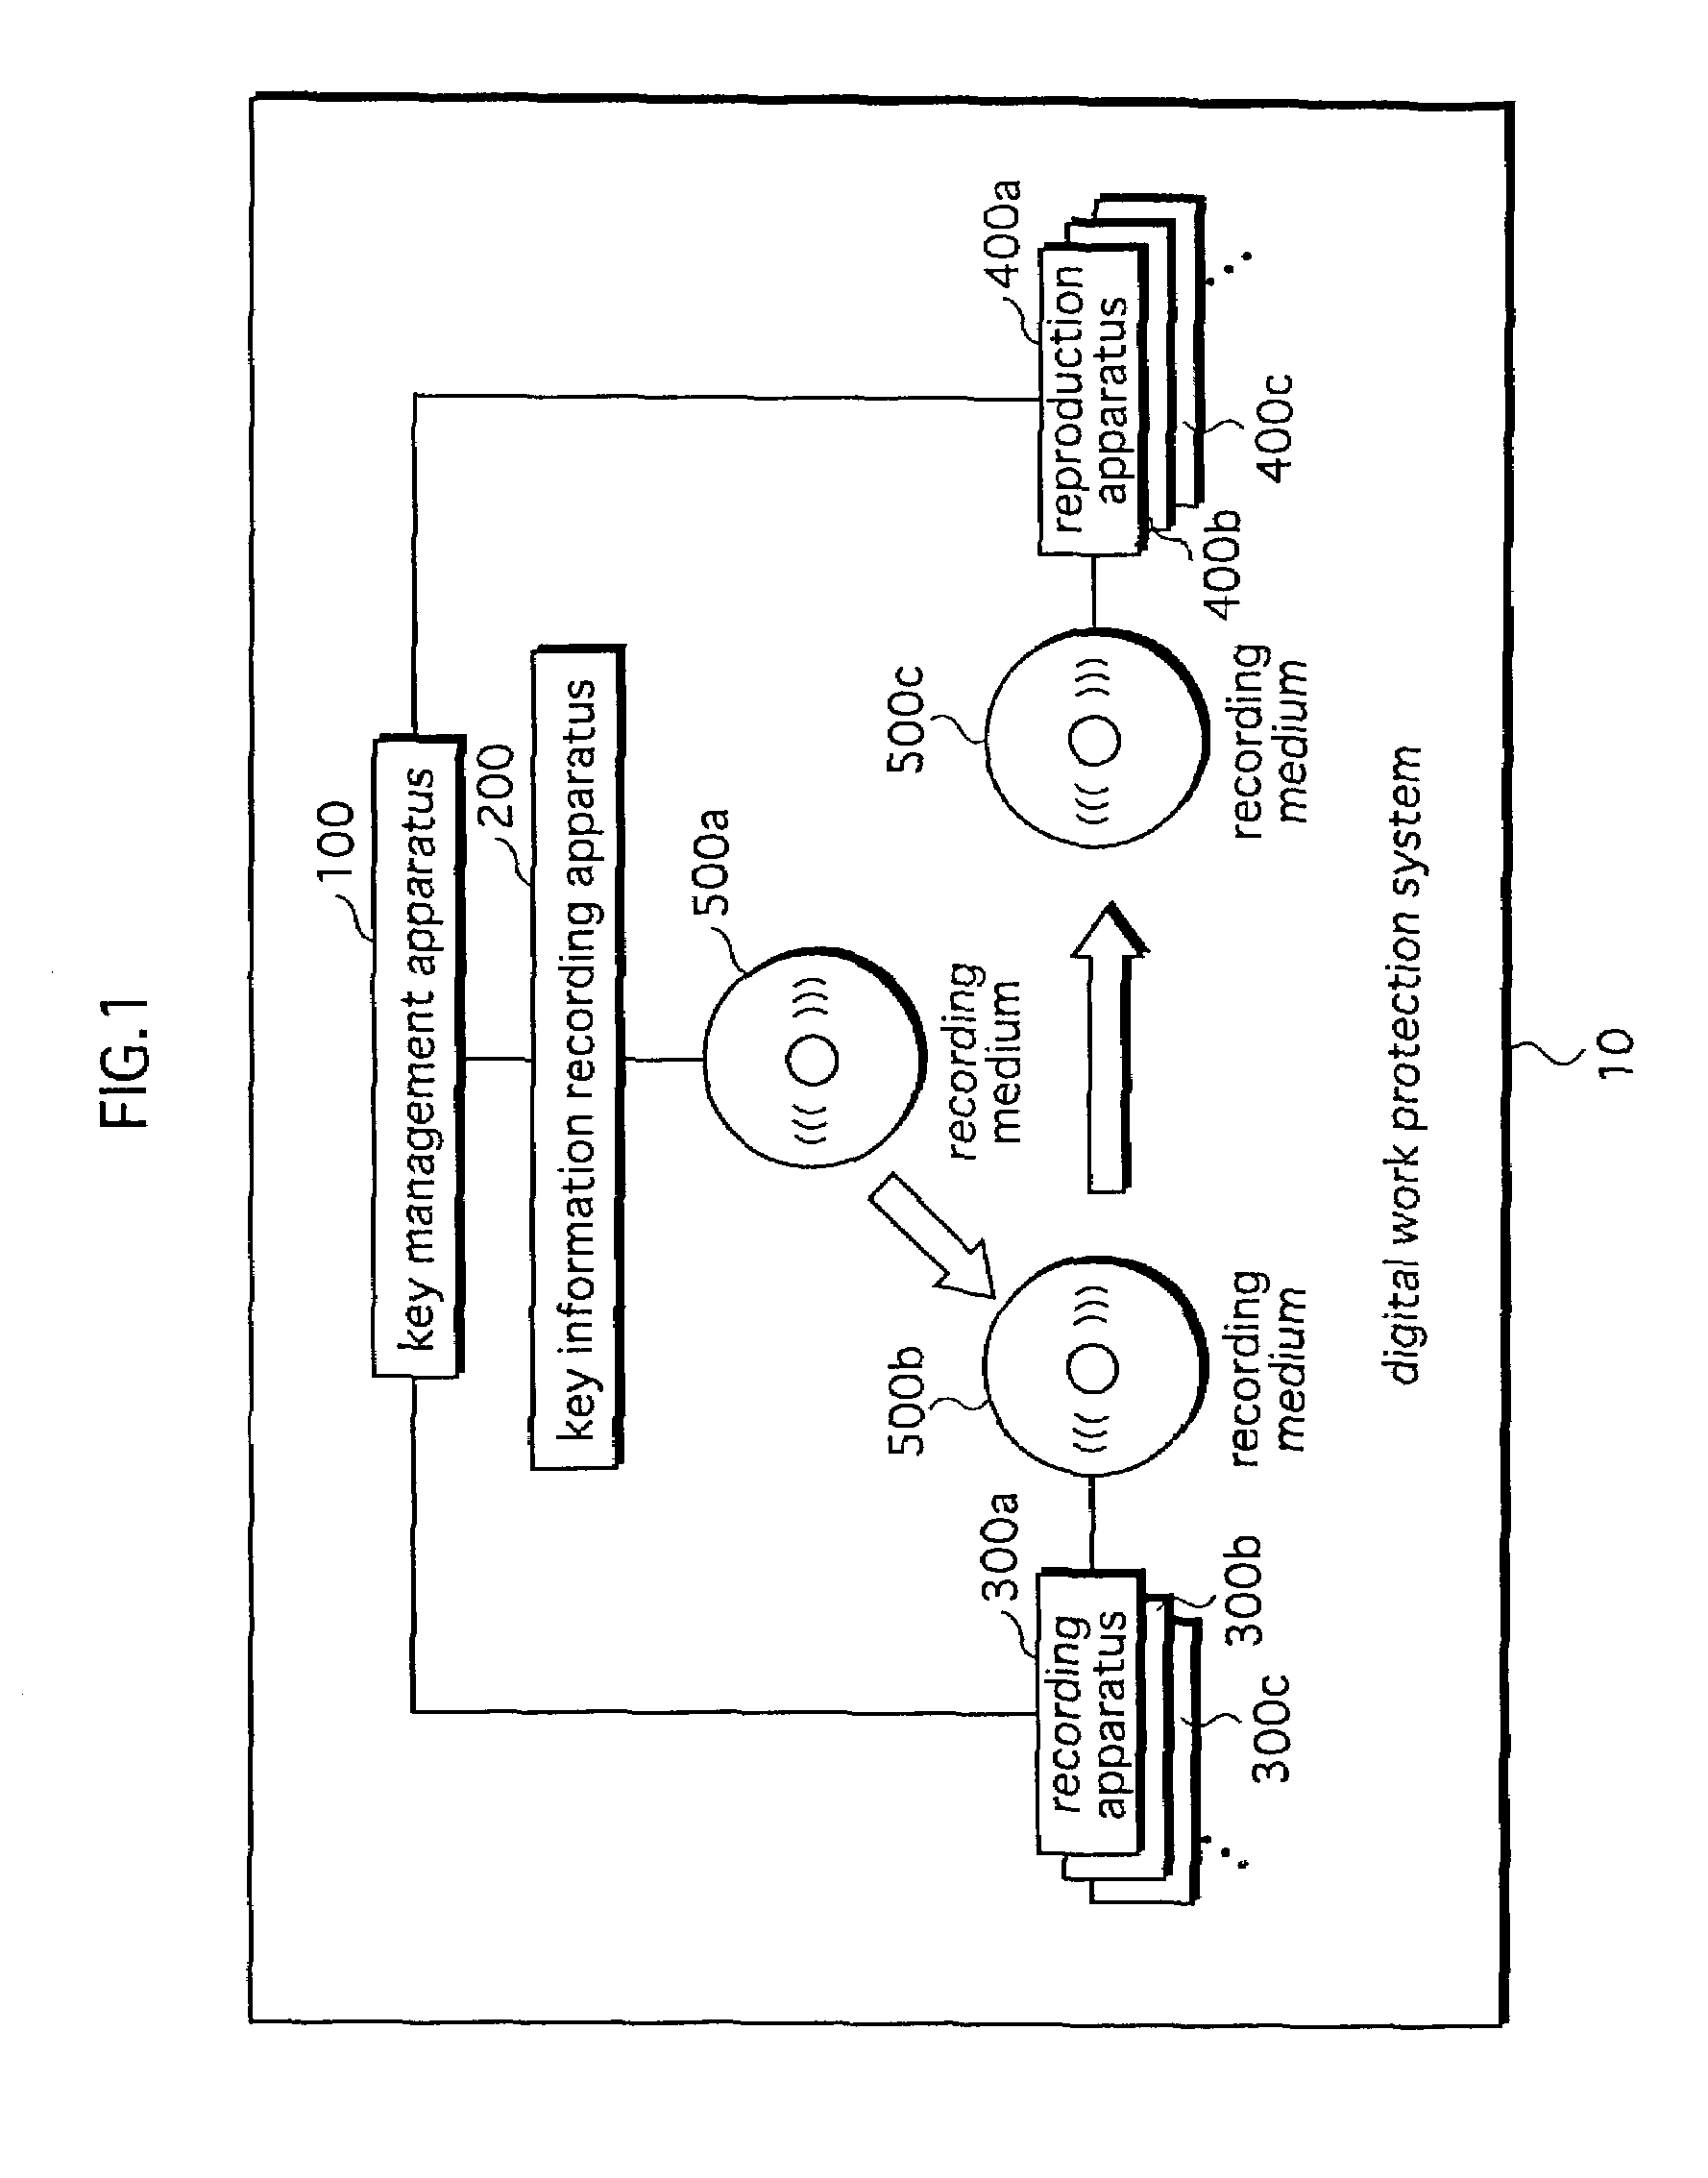 Digital work protection system, key management apparatus, and user apparatus